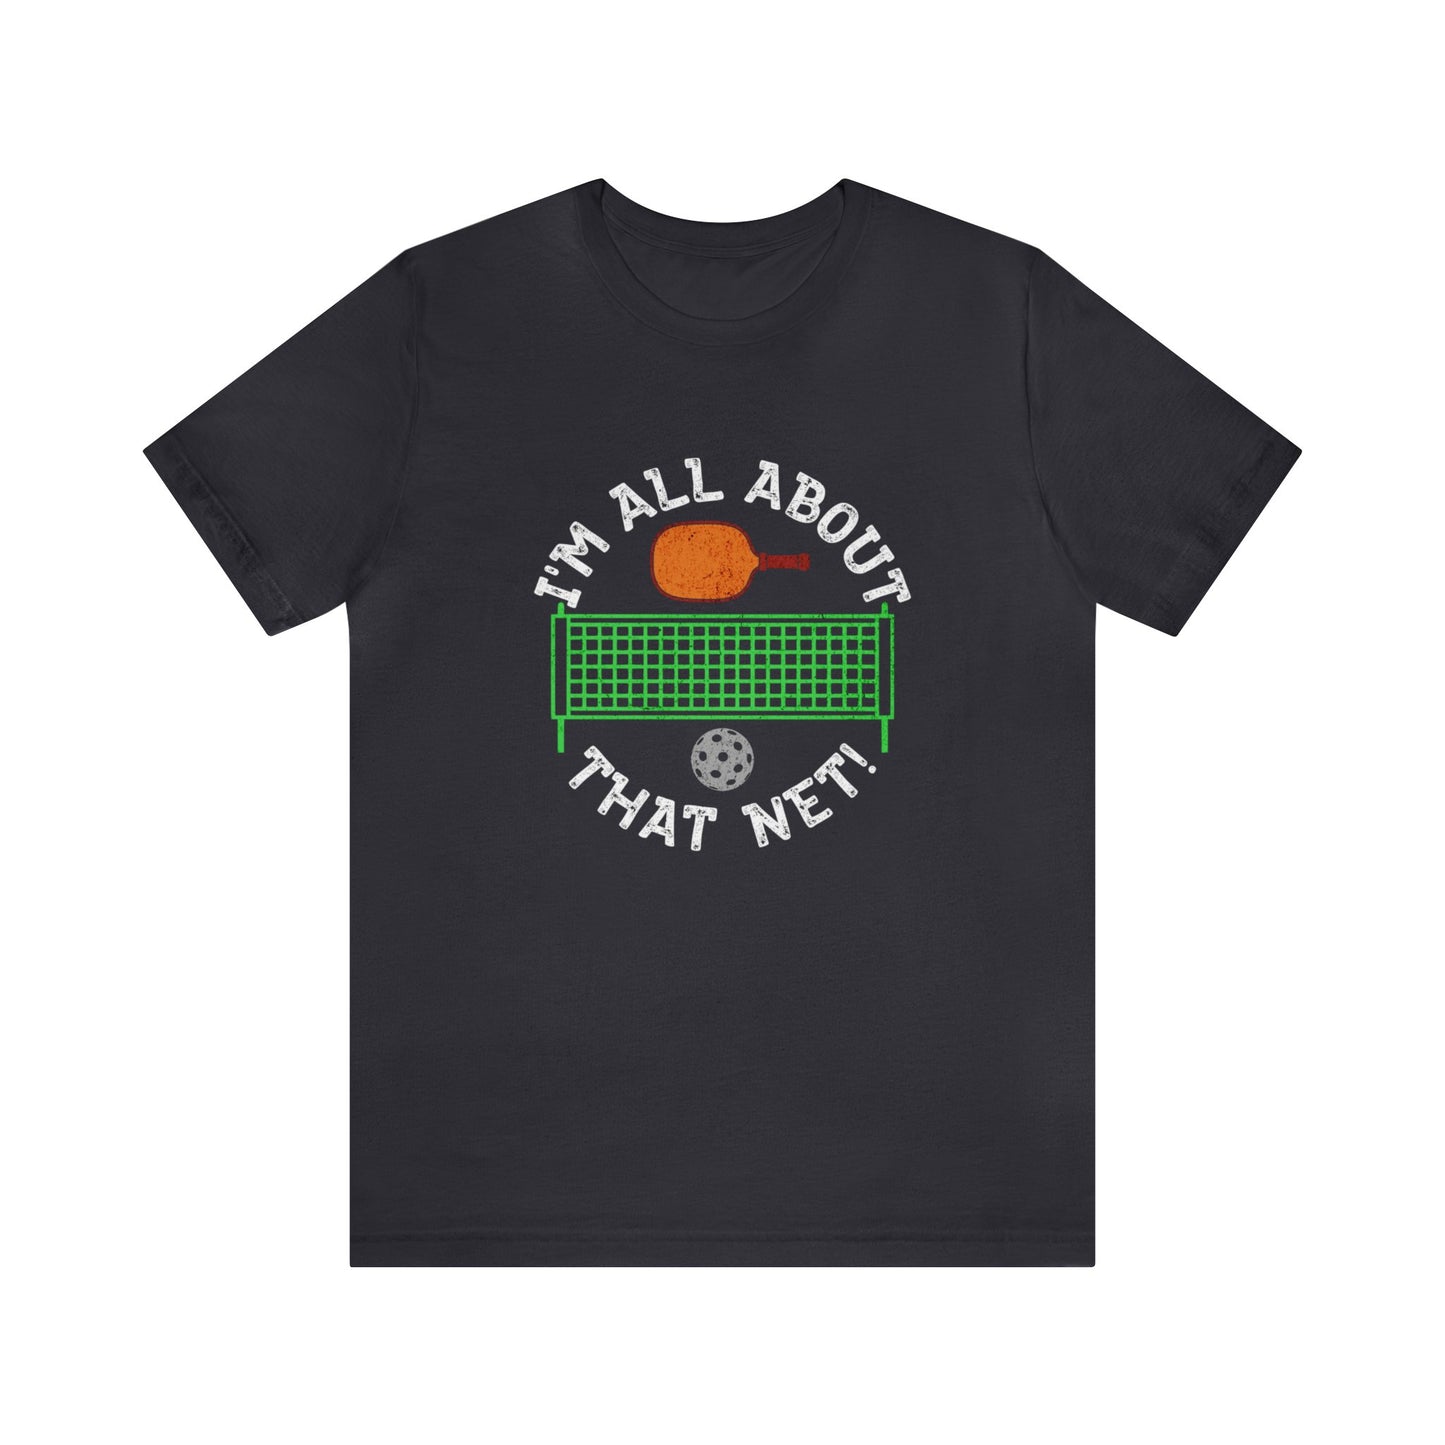 All About That Net - Pickleball Enthusiast's Shirt